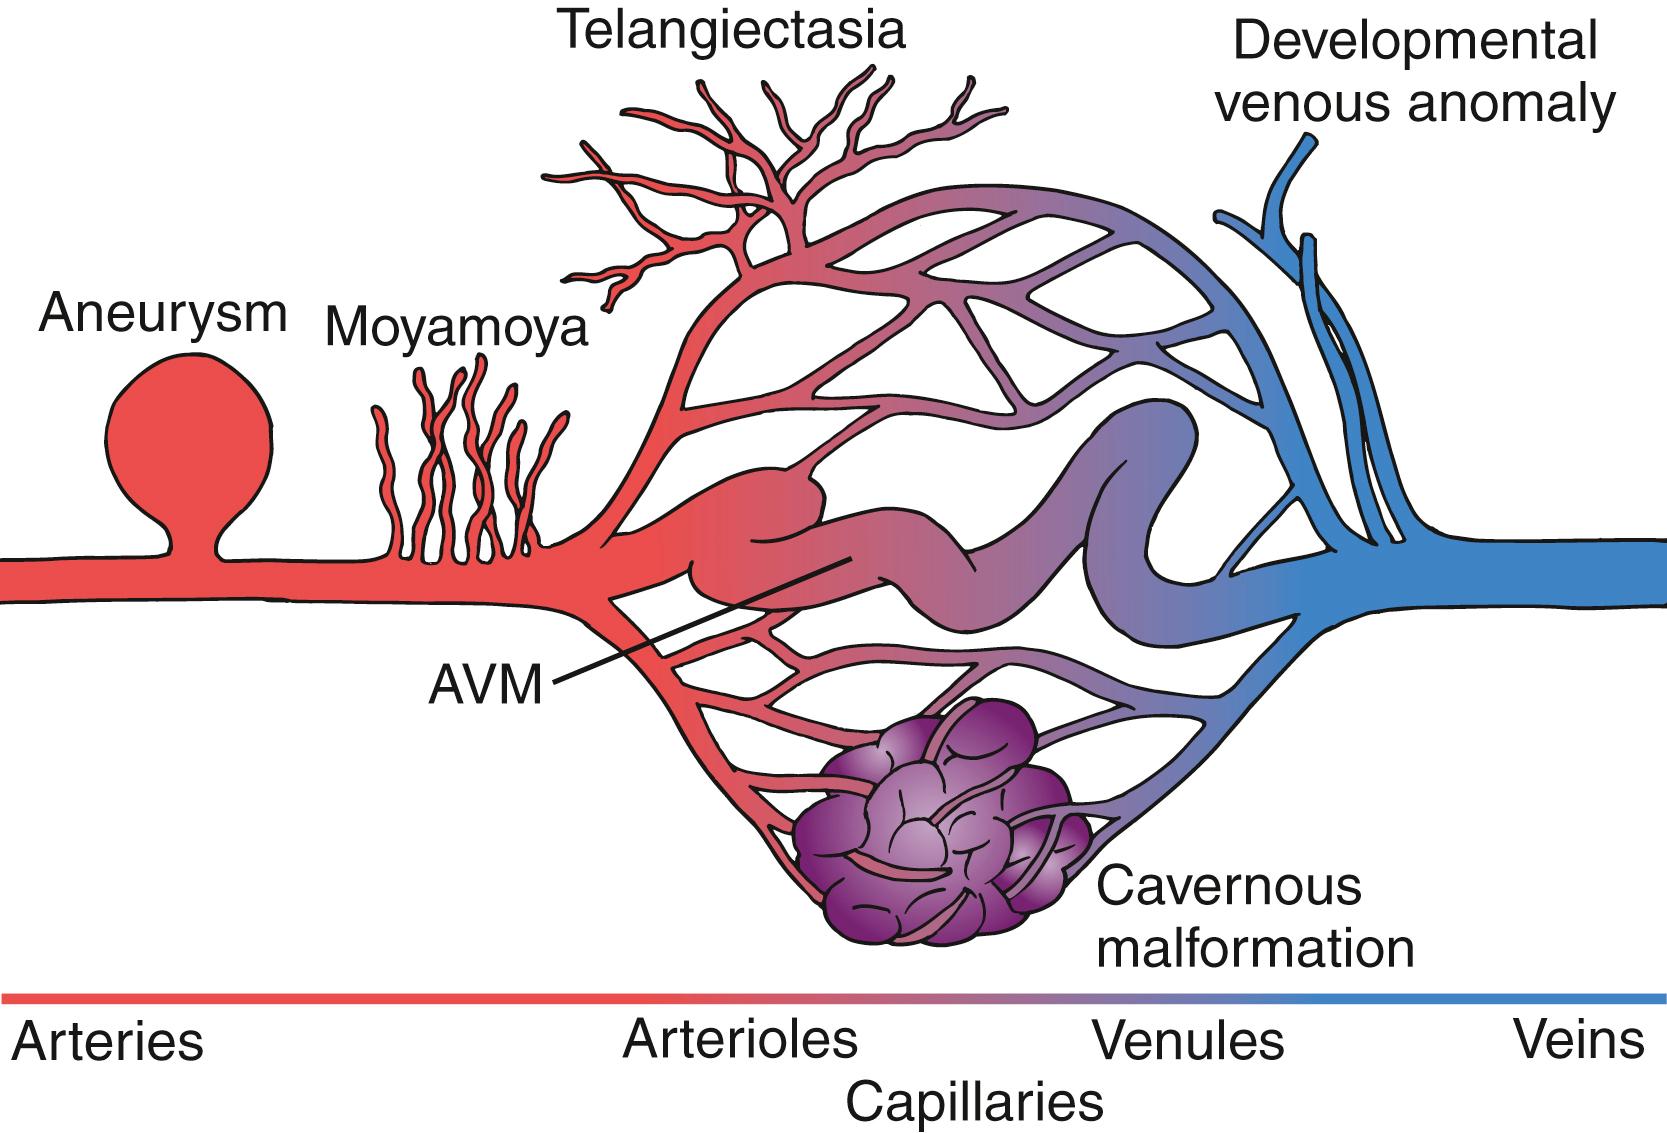 Fig. 30.1, Synopsis of intracerebral vascular anomalies. Only arteriovenous malformations (AVMs) , cavernous malformations, and capillary telangiectasias are considered true malformations.